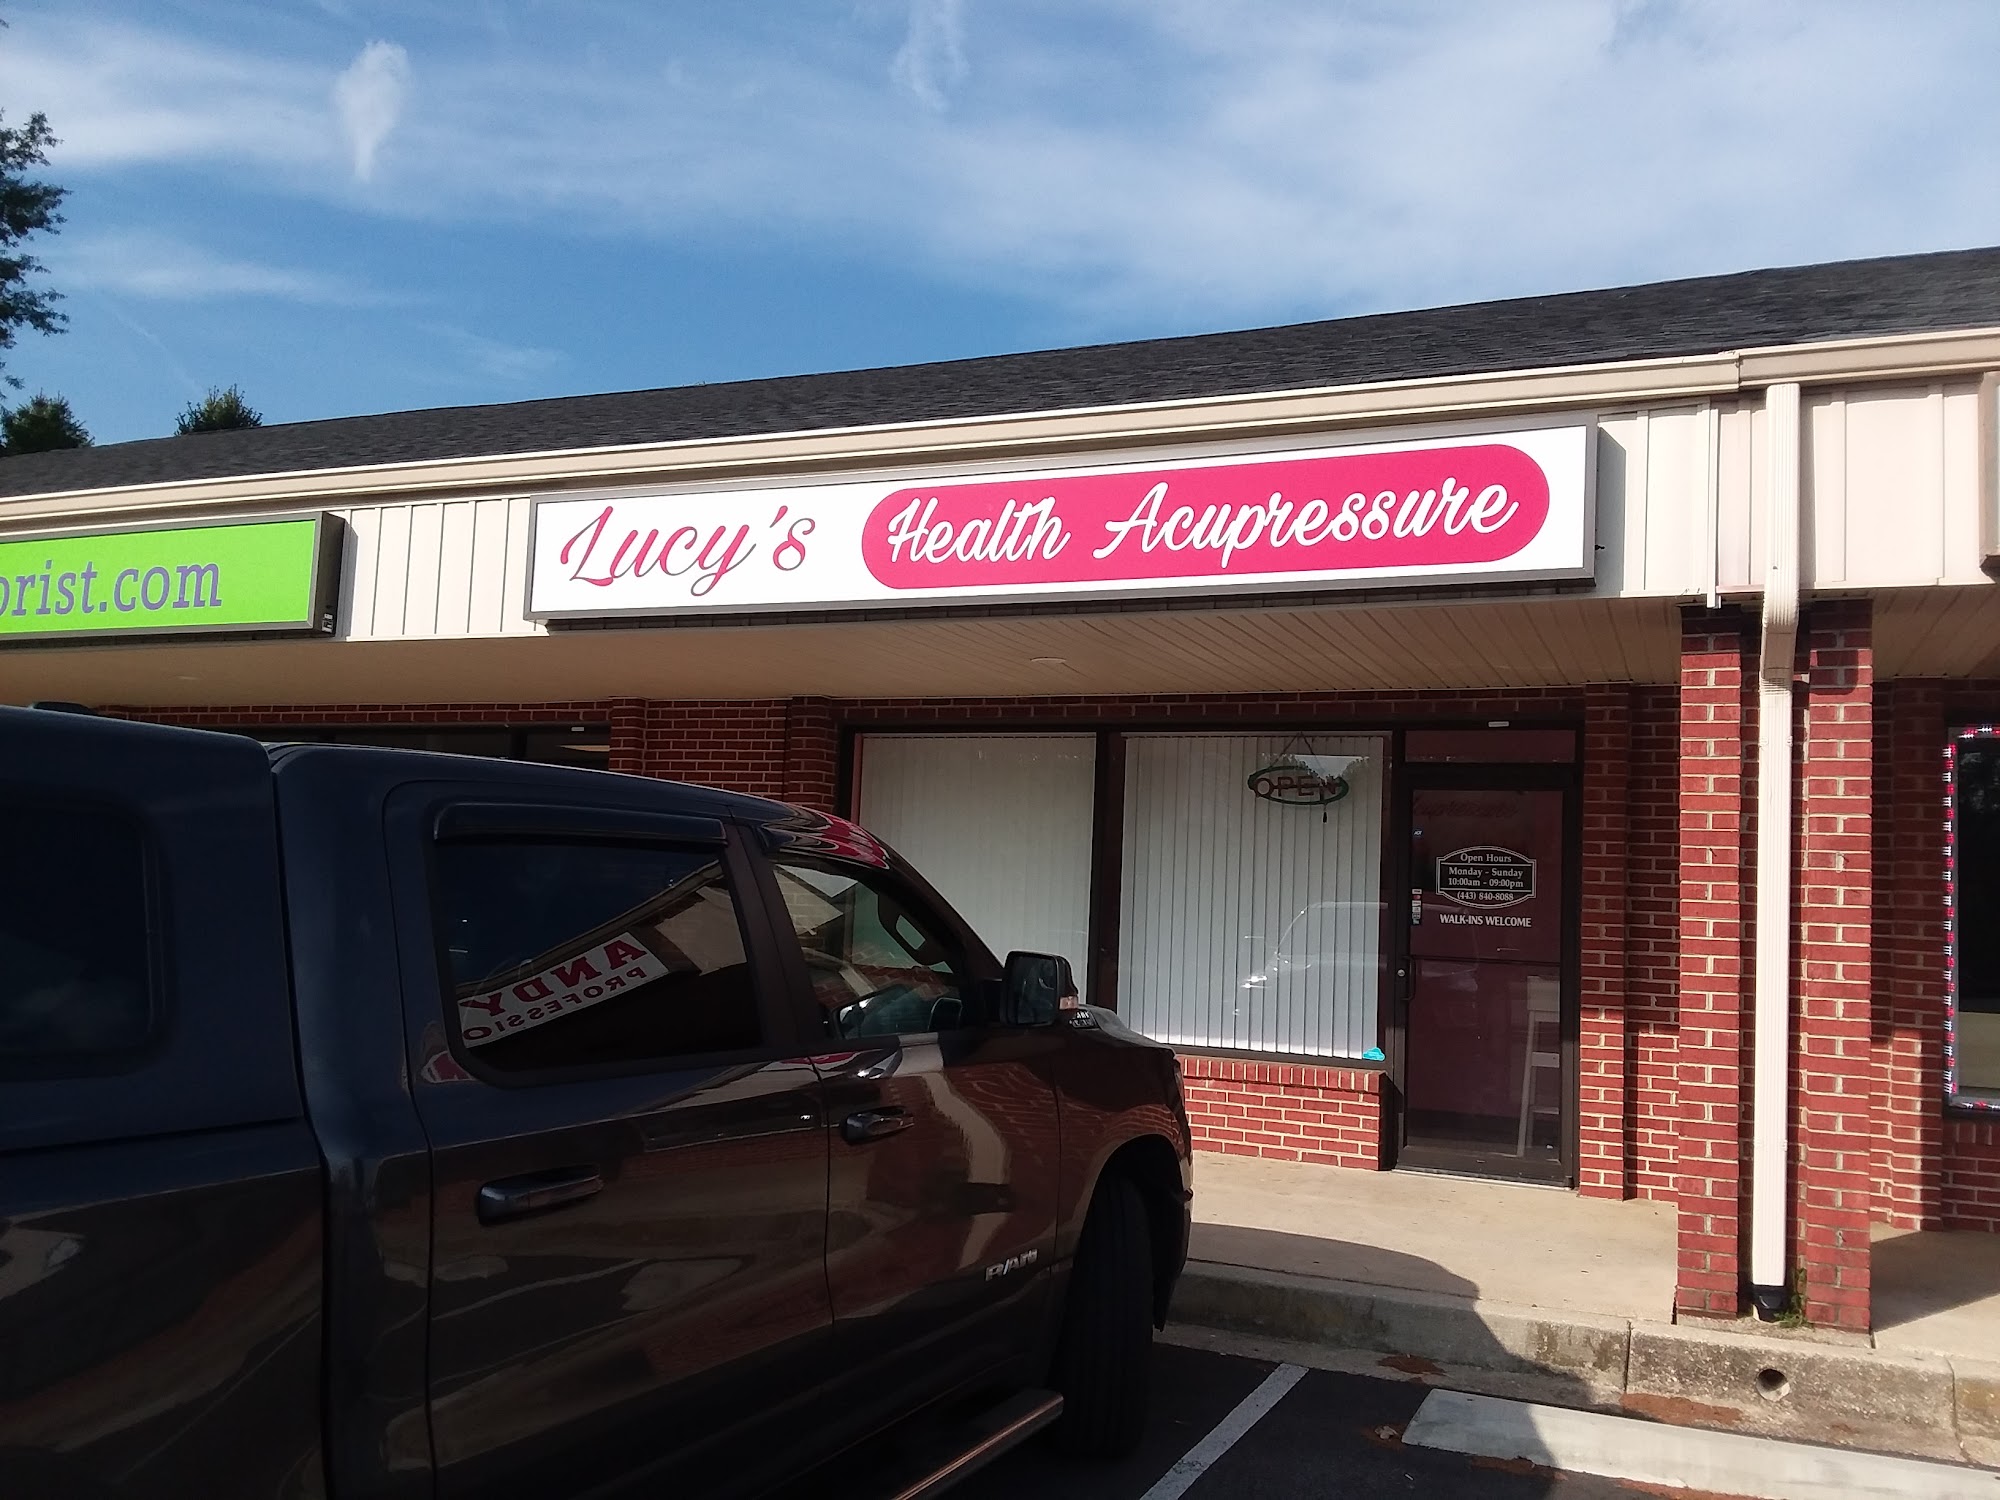 Lucy's Health Acupressure Spa 7916 Southern Maryland Blvd, Owings Maryland 20736